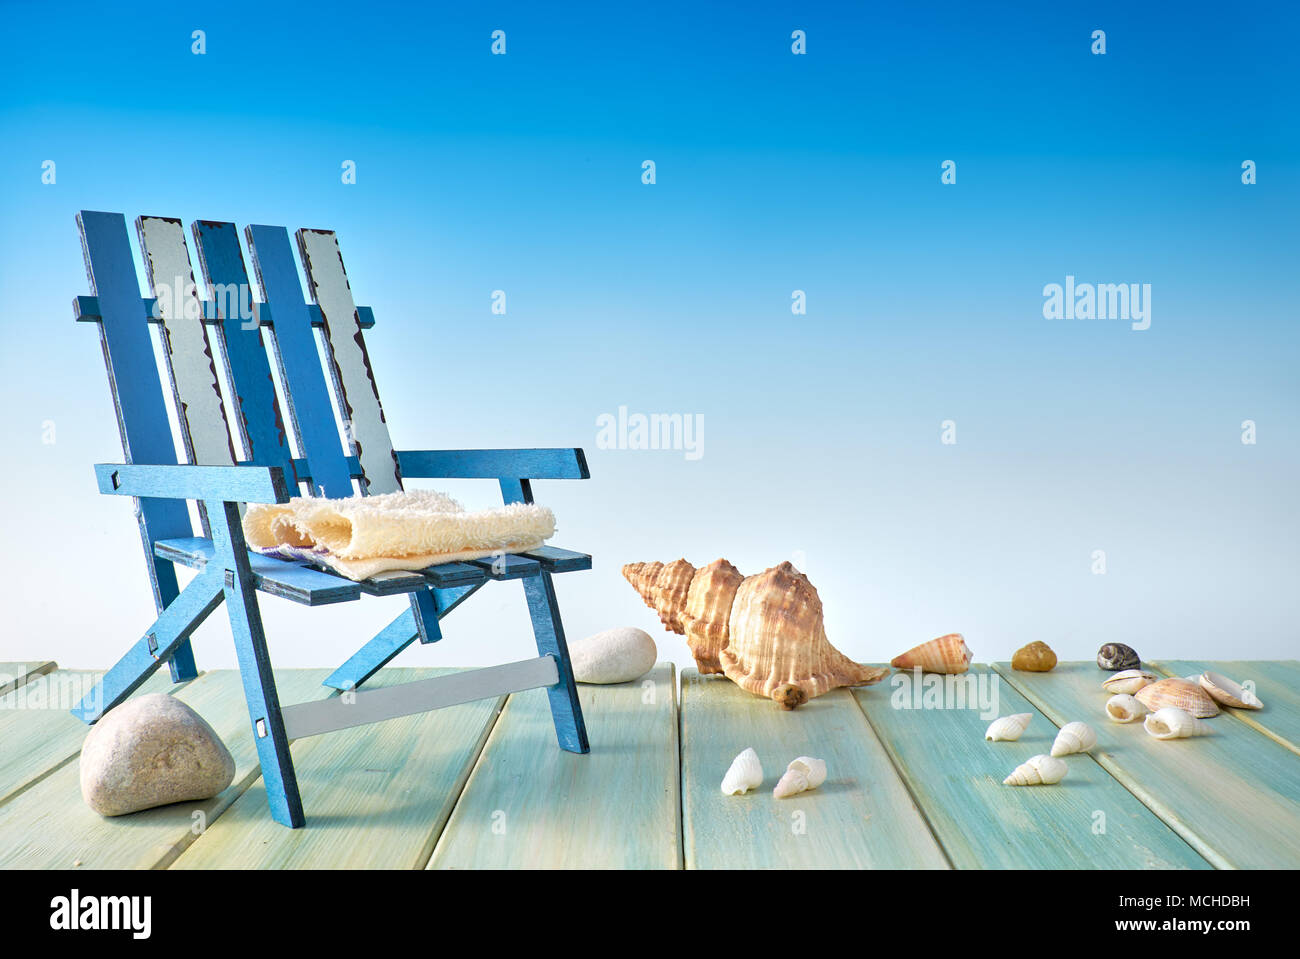 Summertime holiday background with text space. Beach chair on wooden terrace with sea shells, seaside decorations, copy-space on blue background. Stock Photo